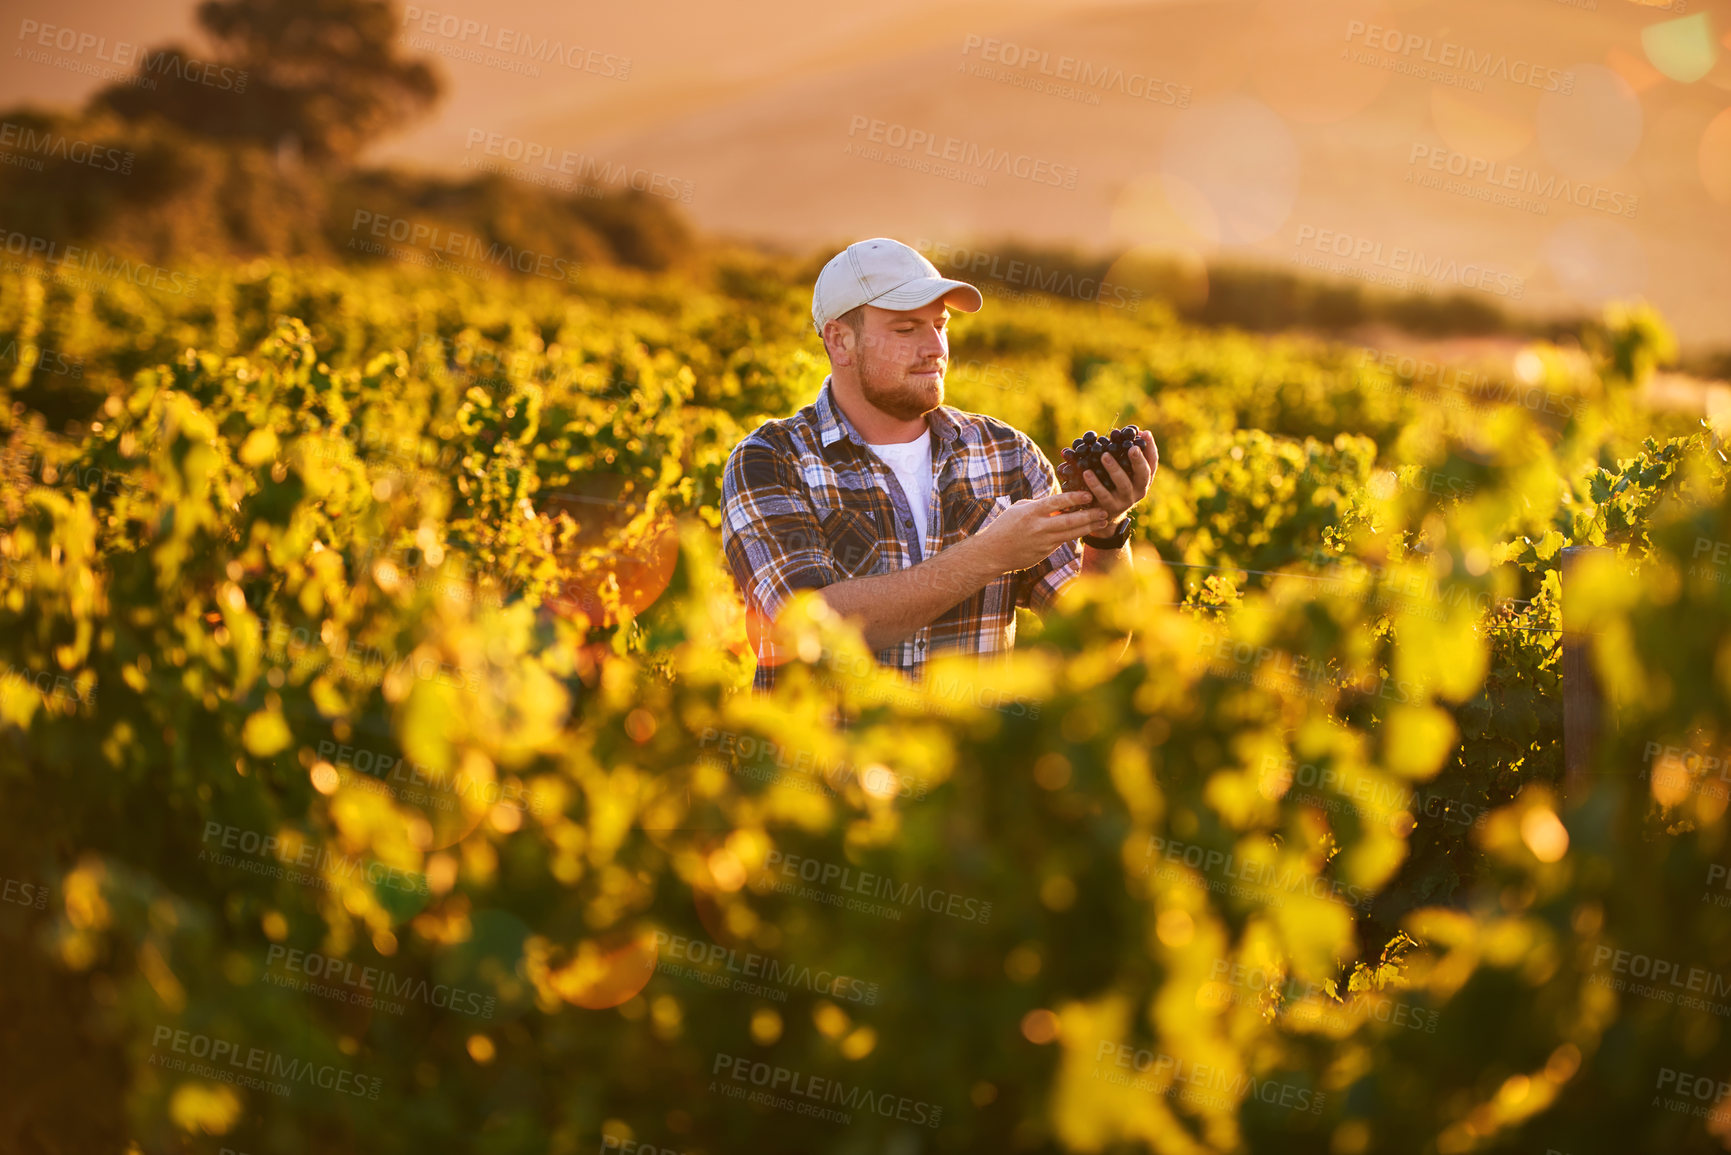 Buy stock photo Shot of a happy farmer holding a bunch of grapes while standing in a vineyard